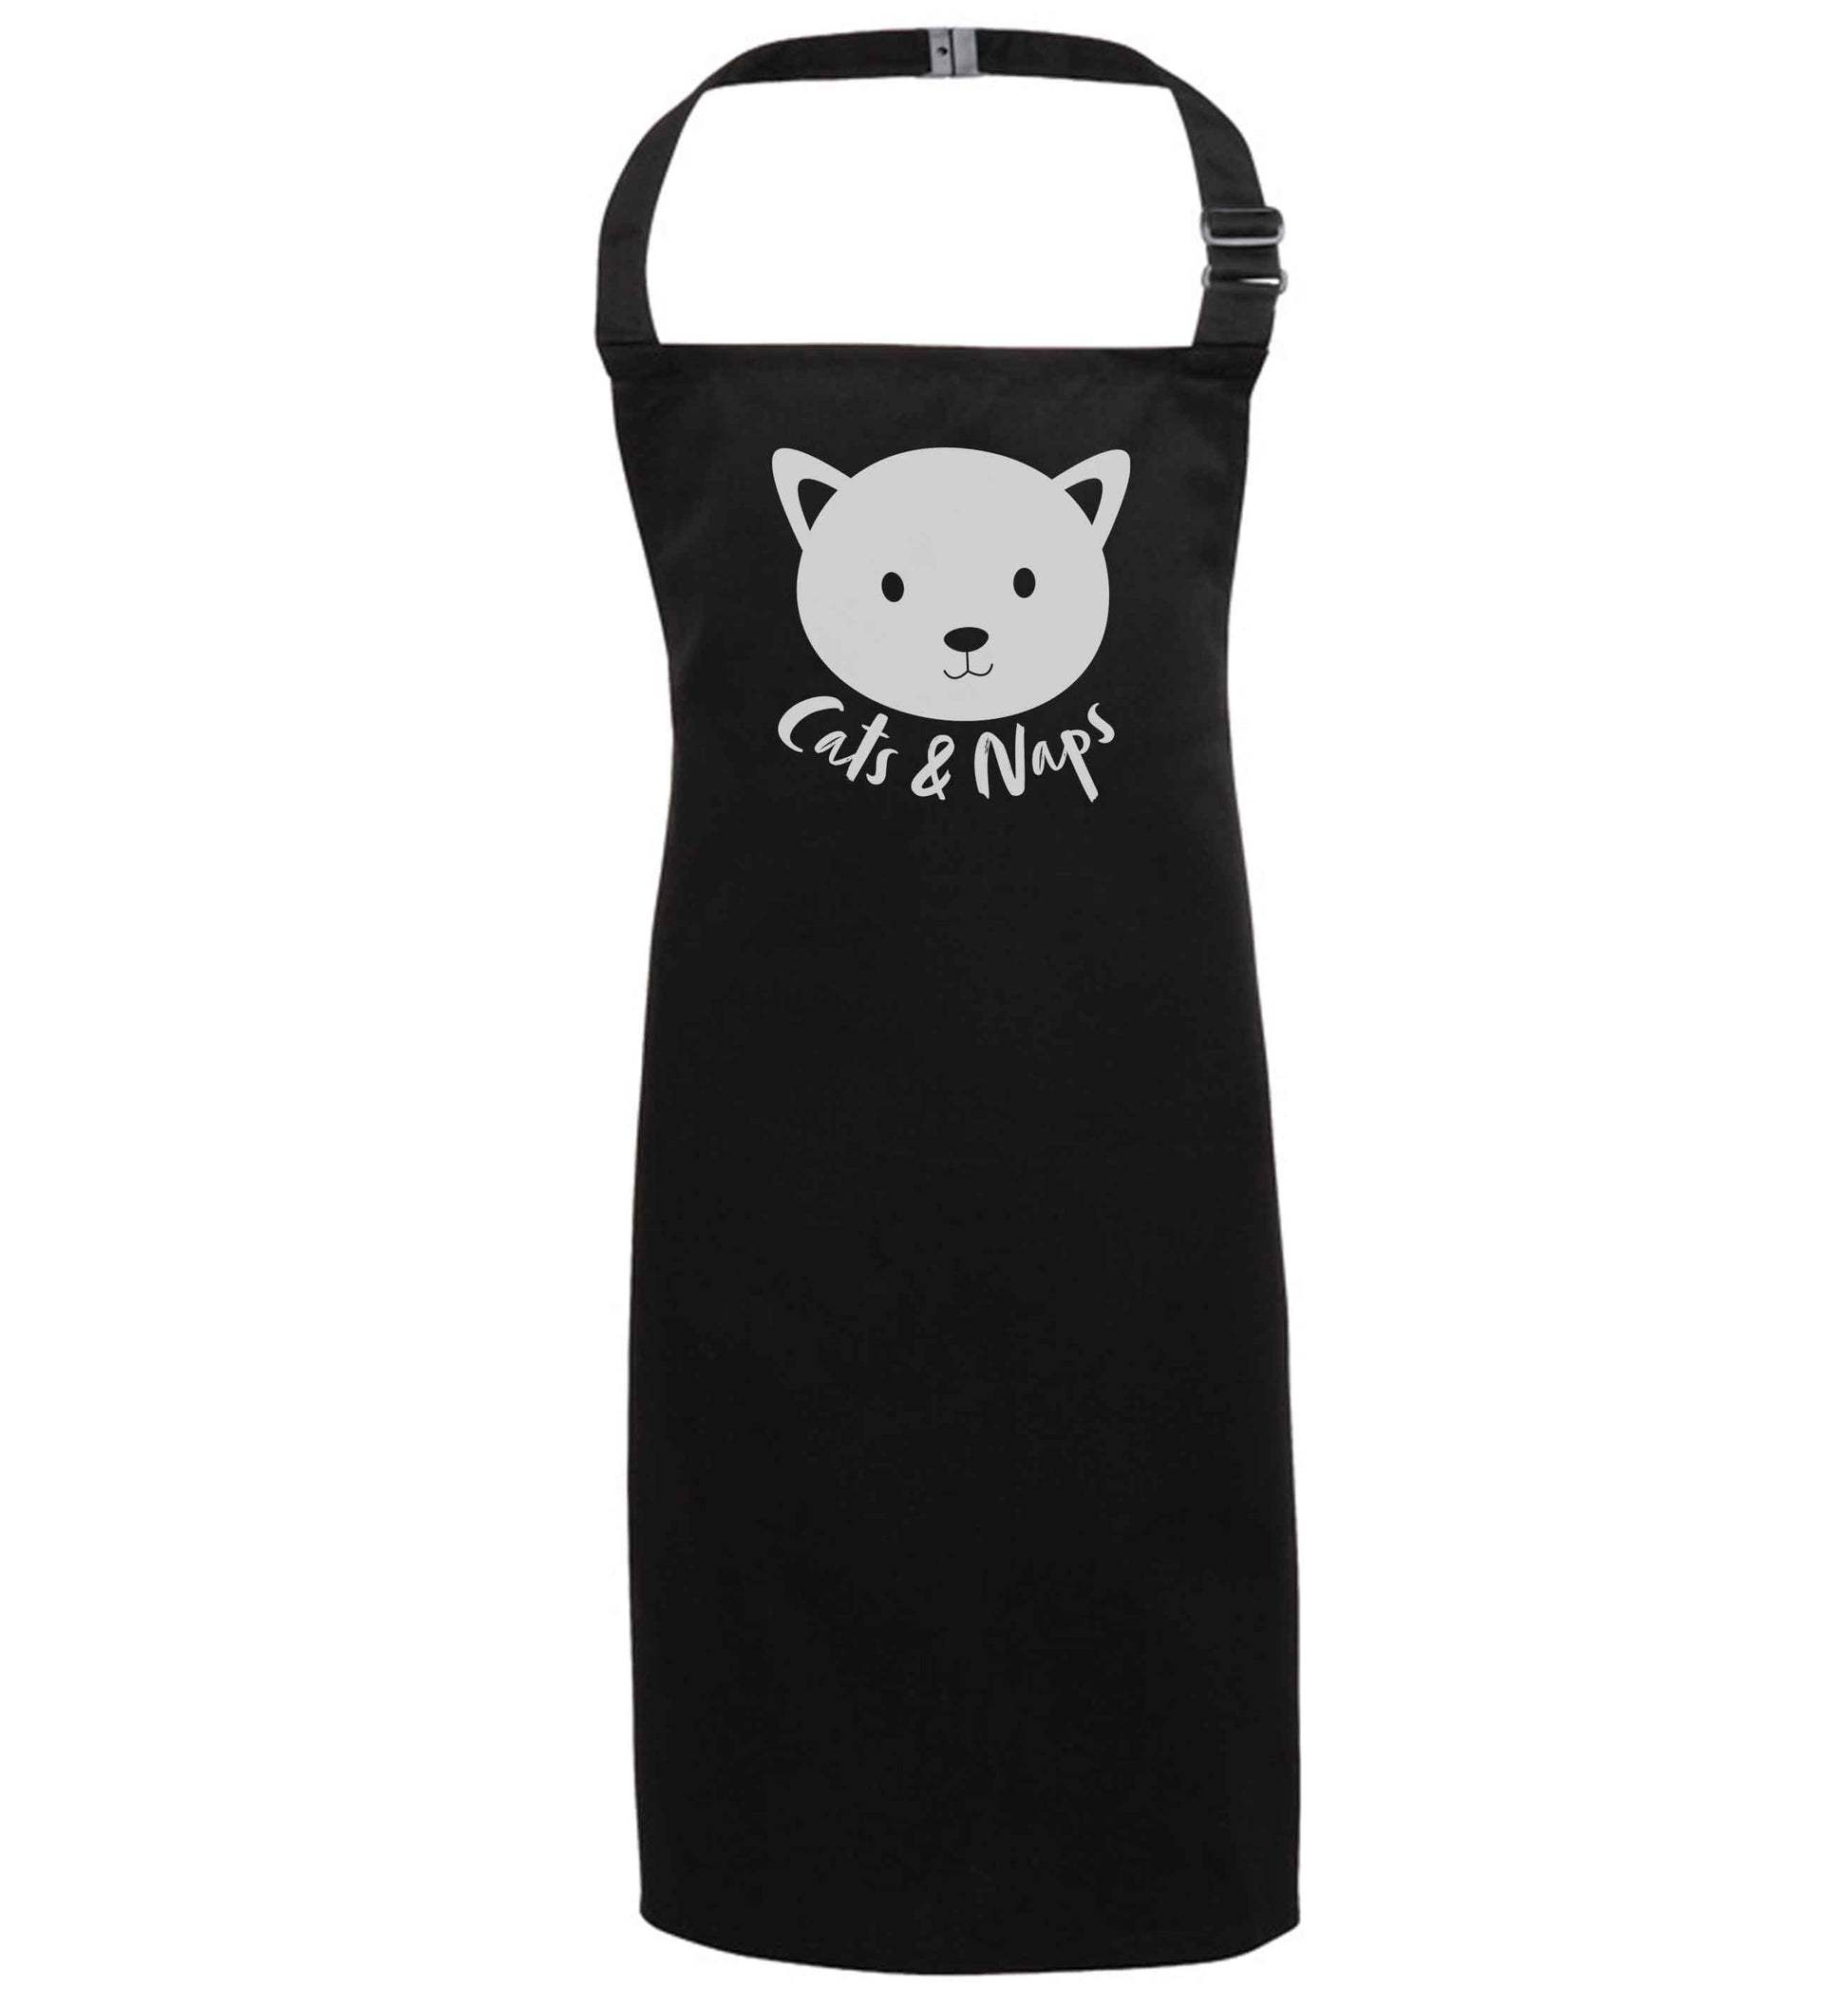 Cats and naps Kit black apron 7-10 years